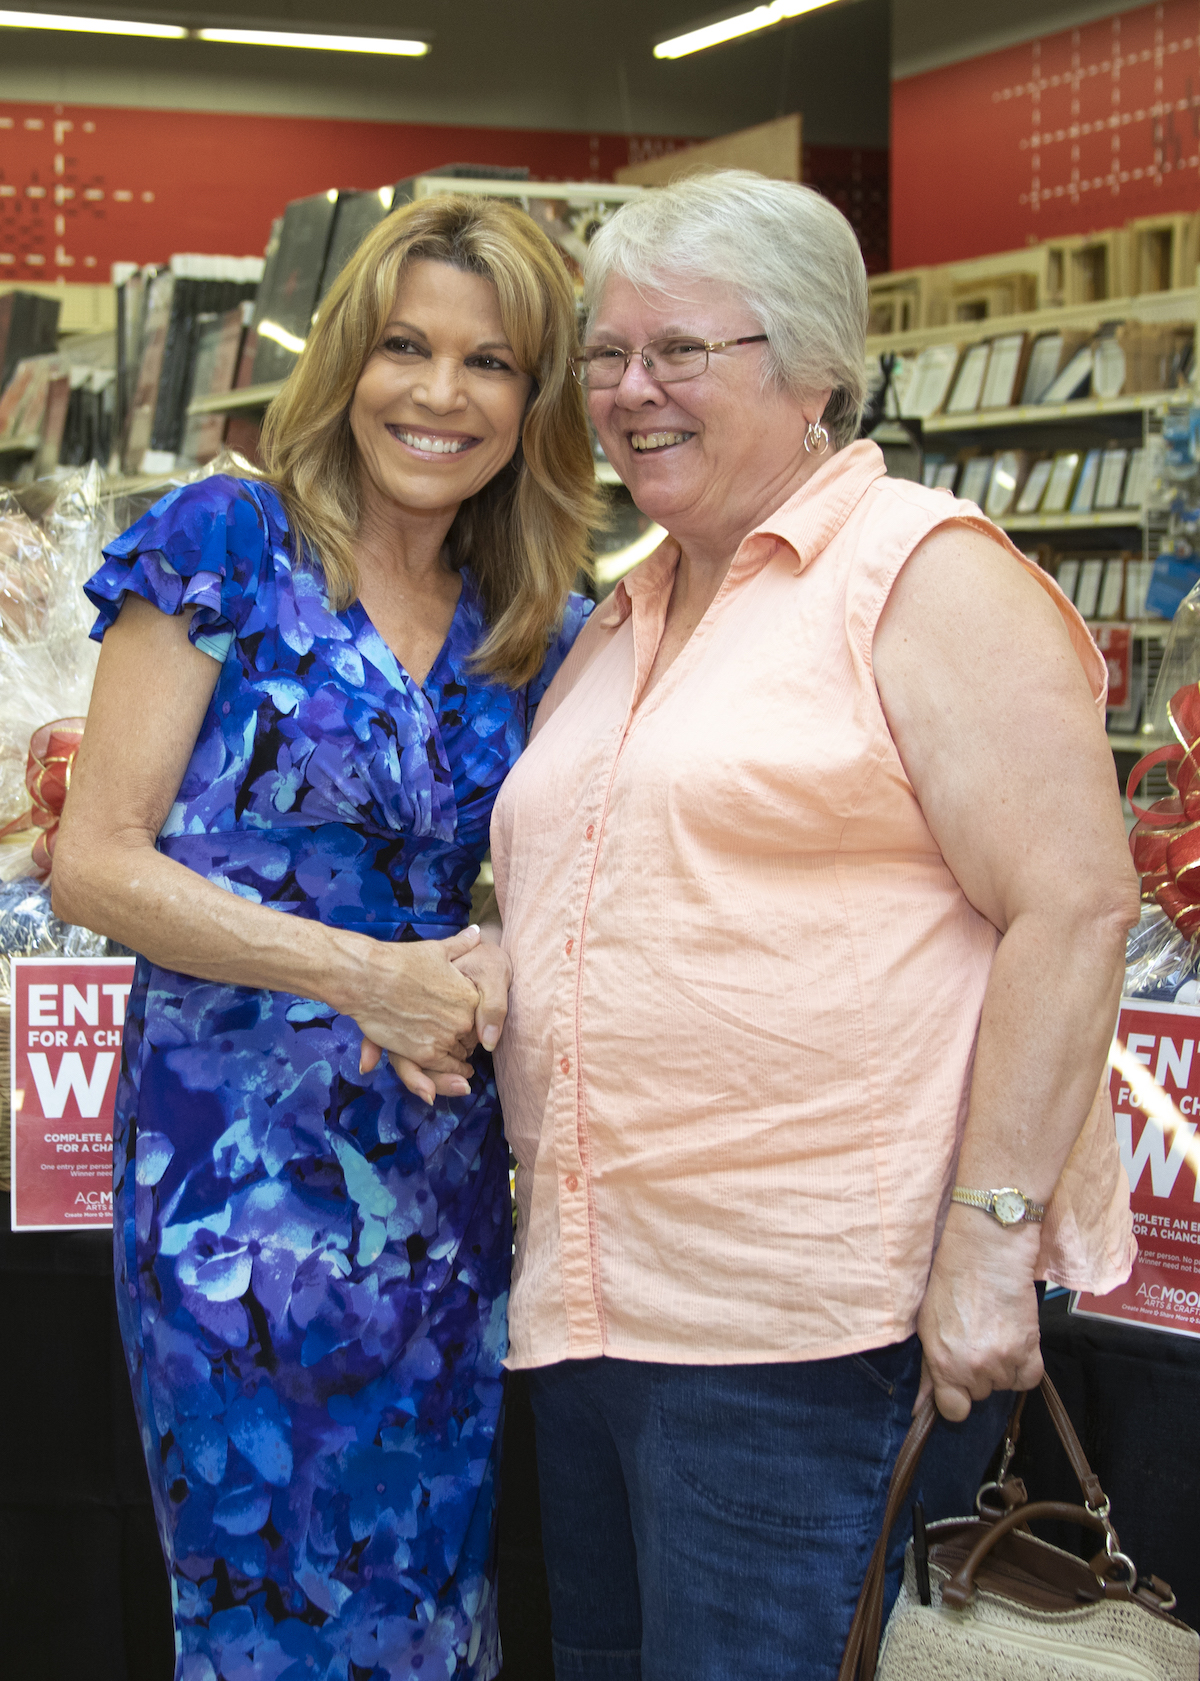 Vanna White and Fans